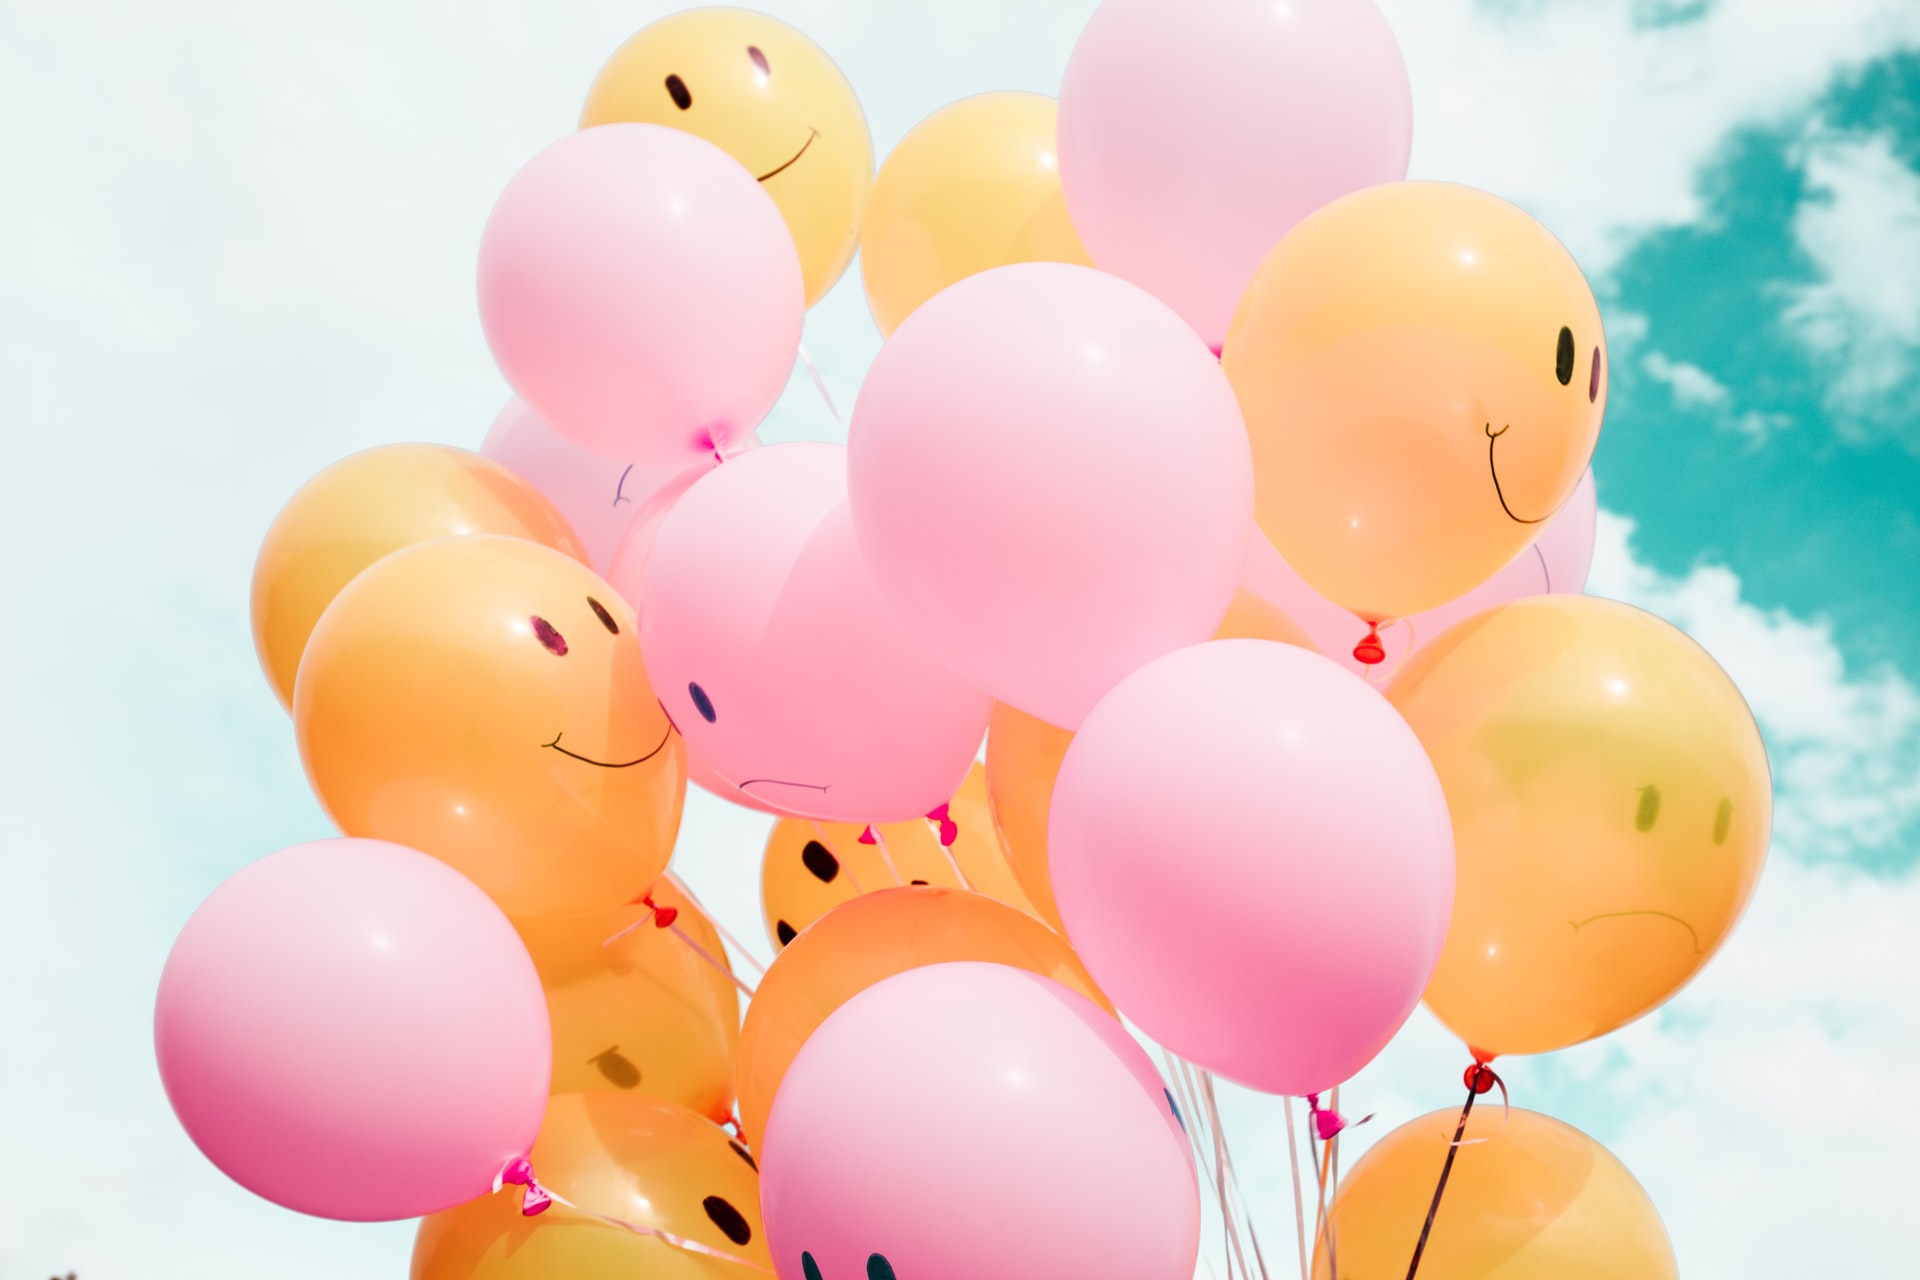 helium balloons with happy faces